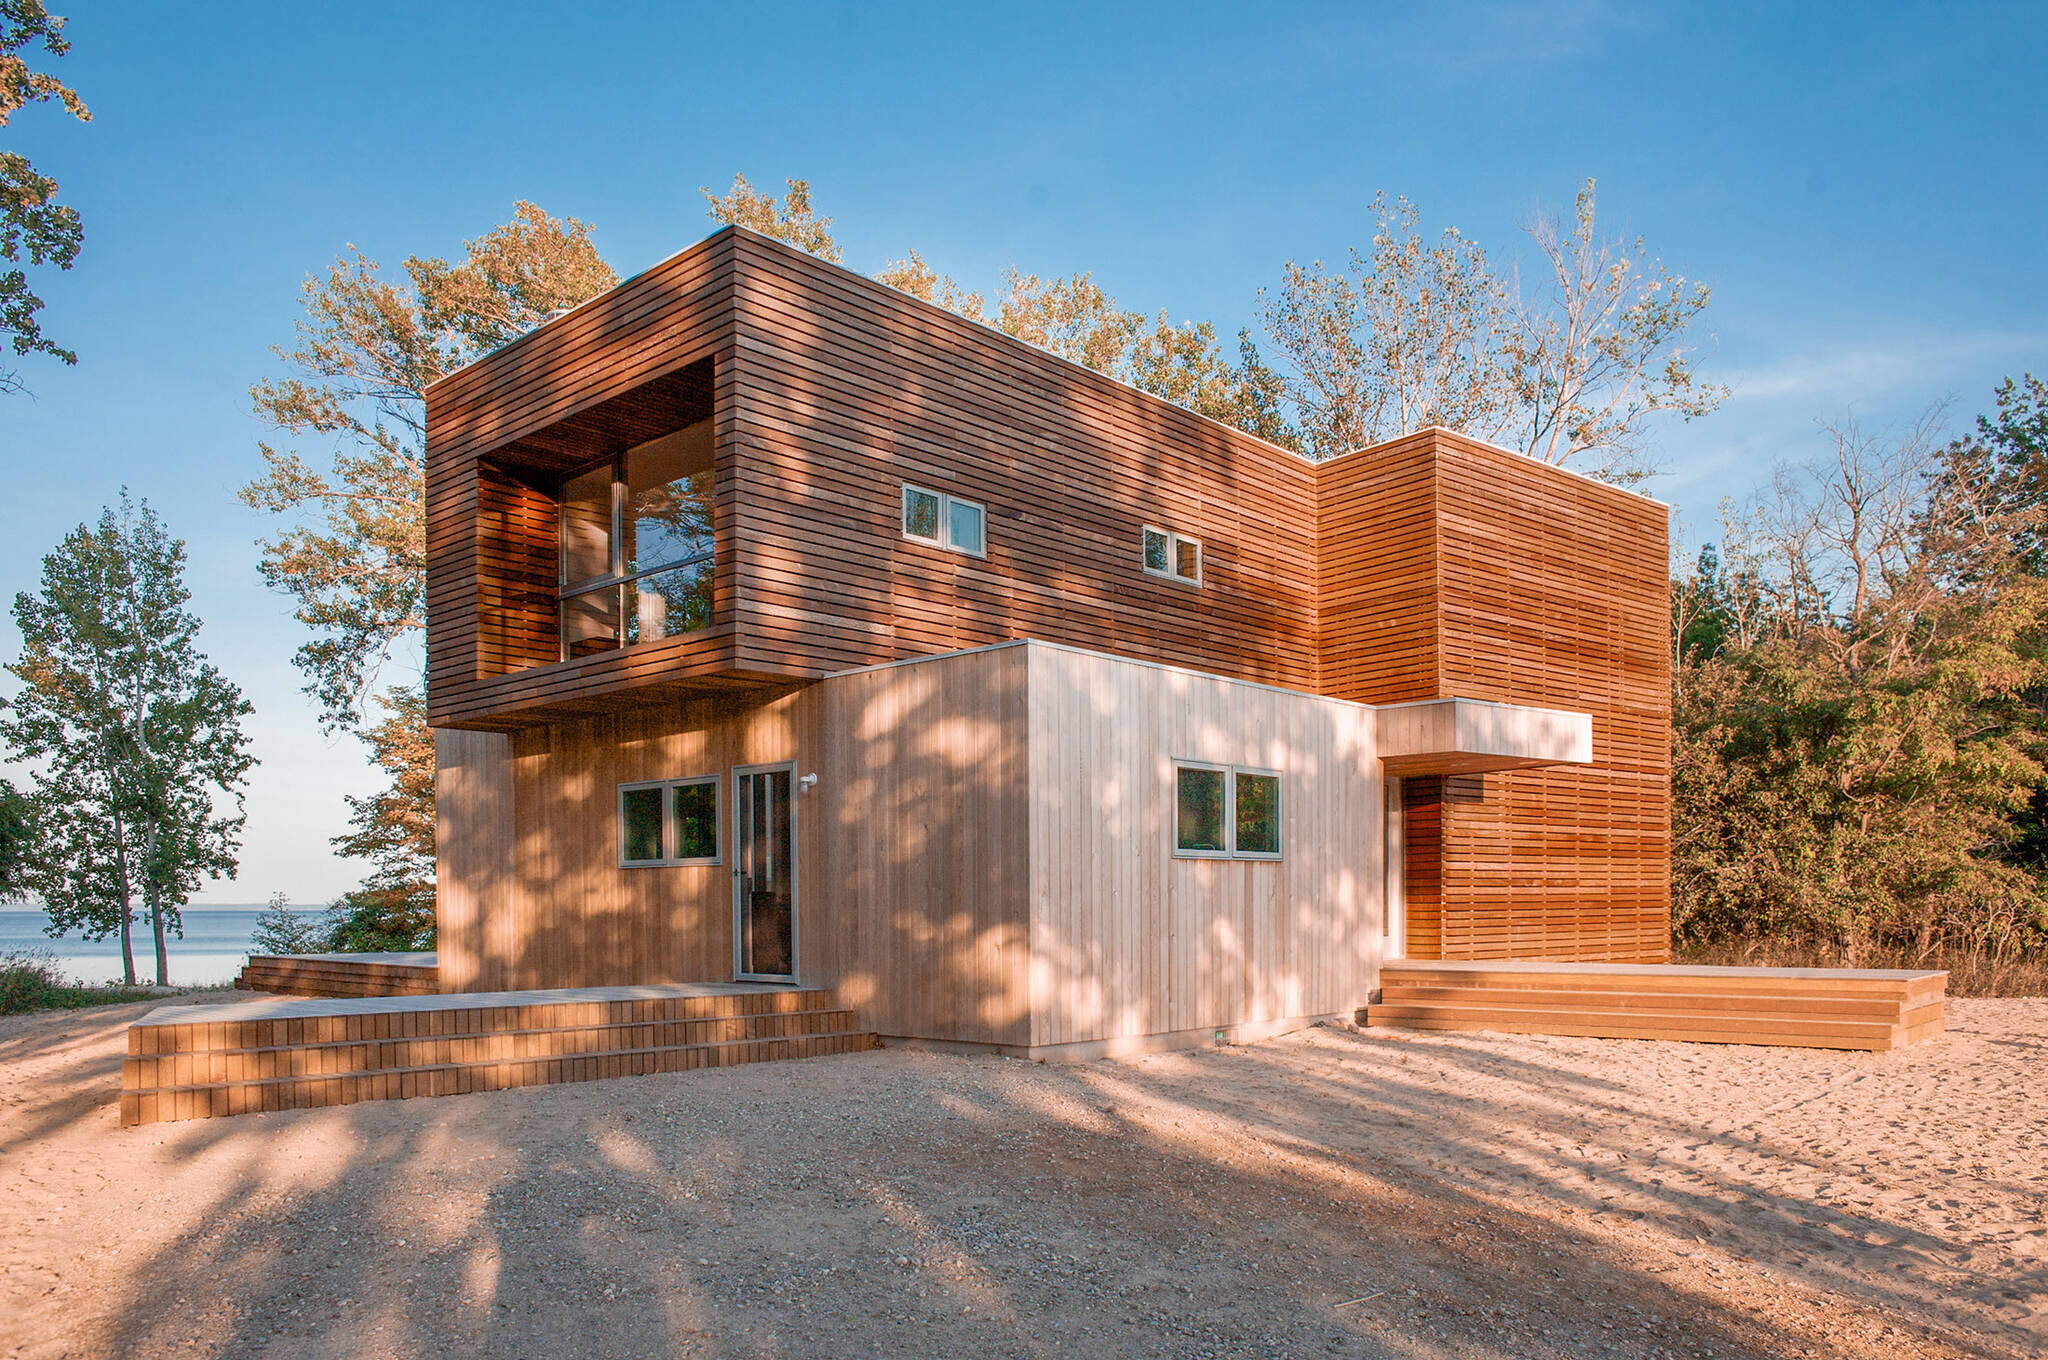 Sustainable lake house project with a LEED-gold certification in Omena, Michigan designed by the architecture studio Danny Forster & Architecture